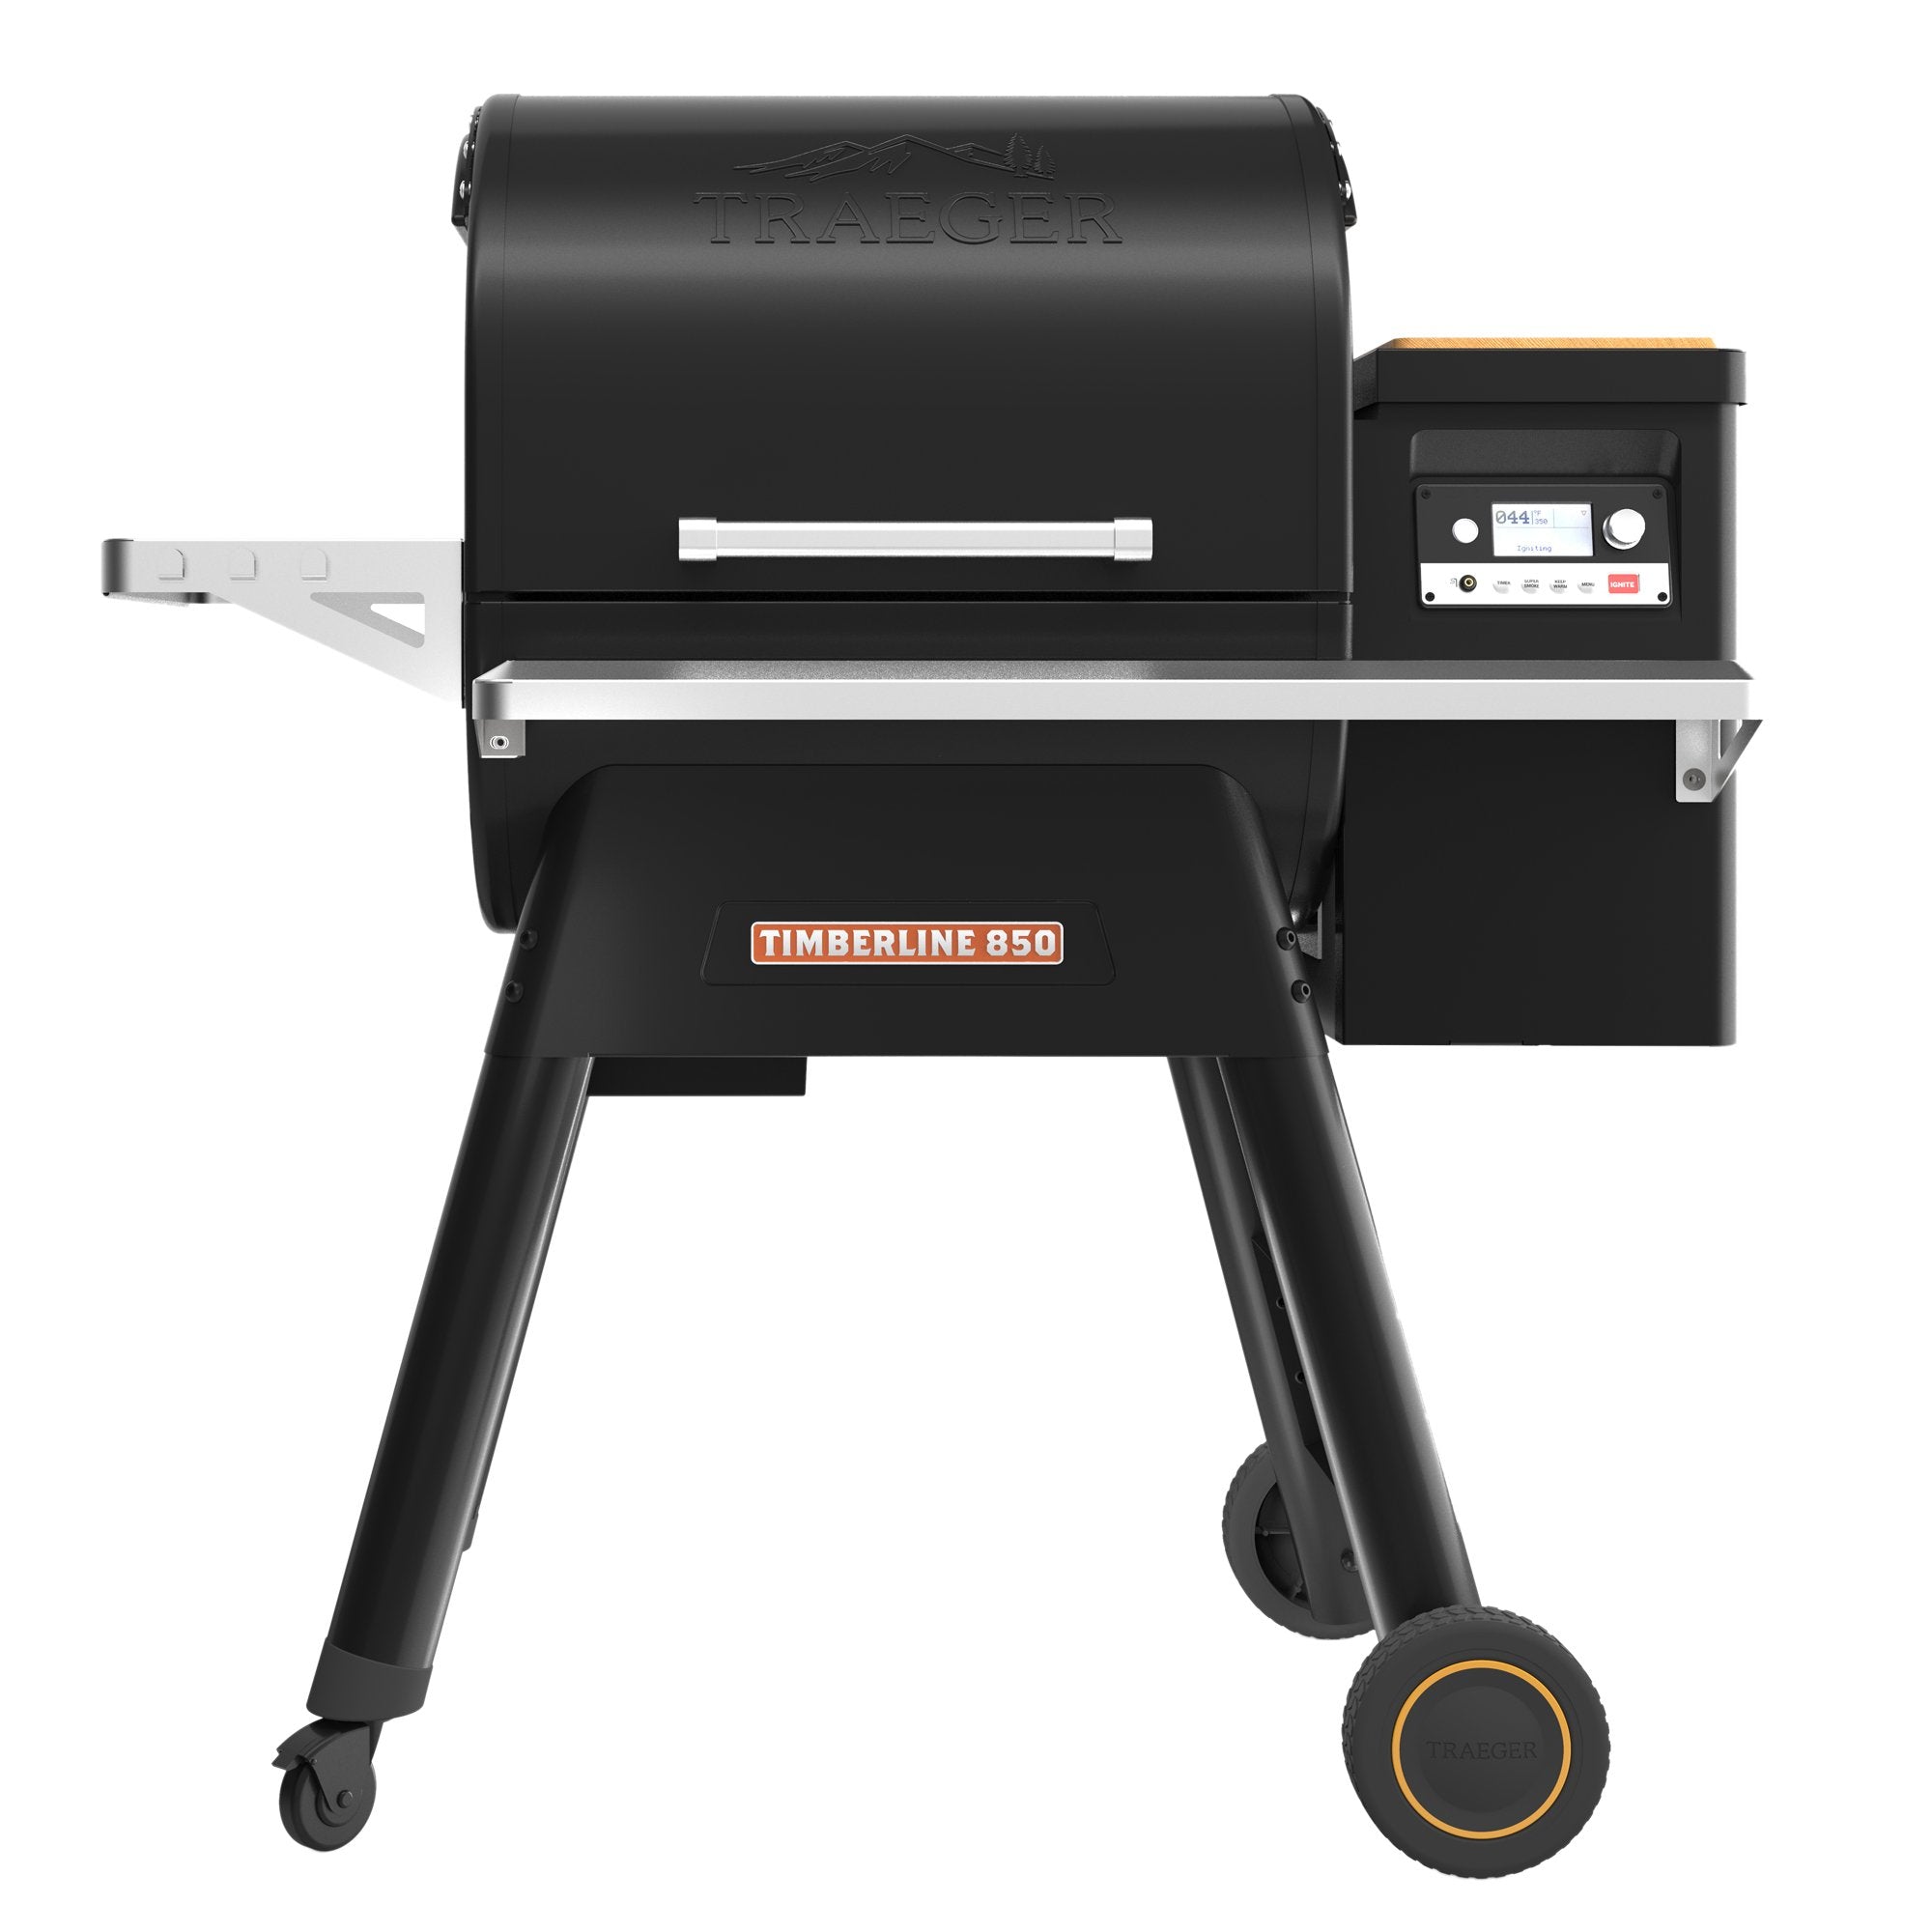 Traeger Timberline 850– Bourlier's Barbecue and Fireplace